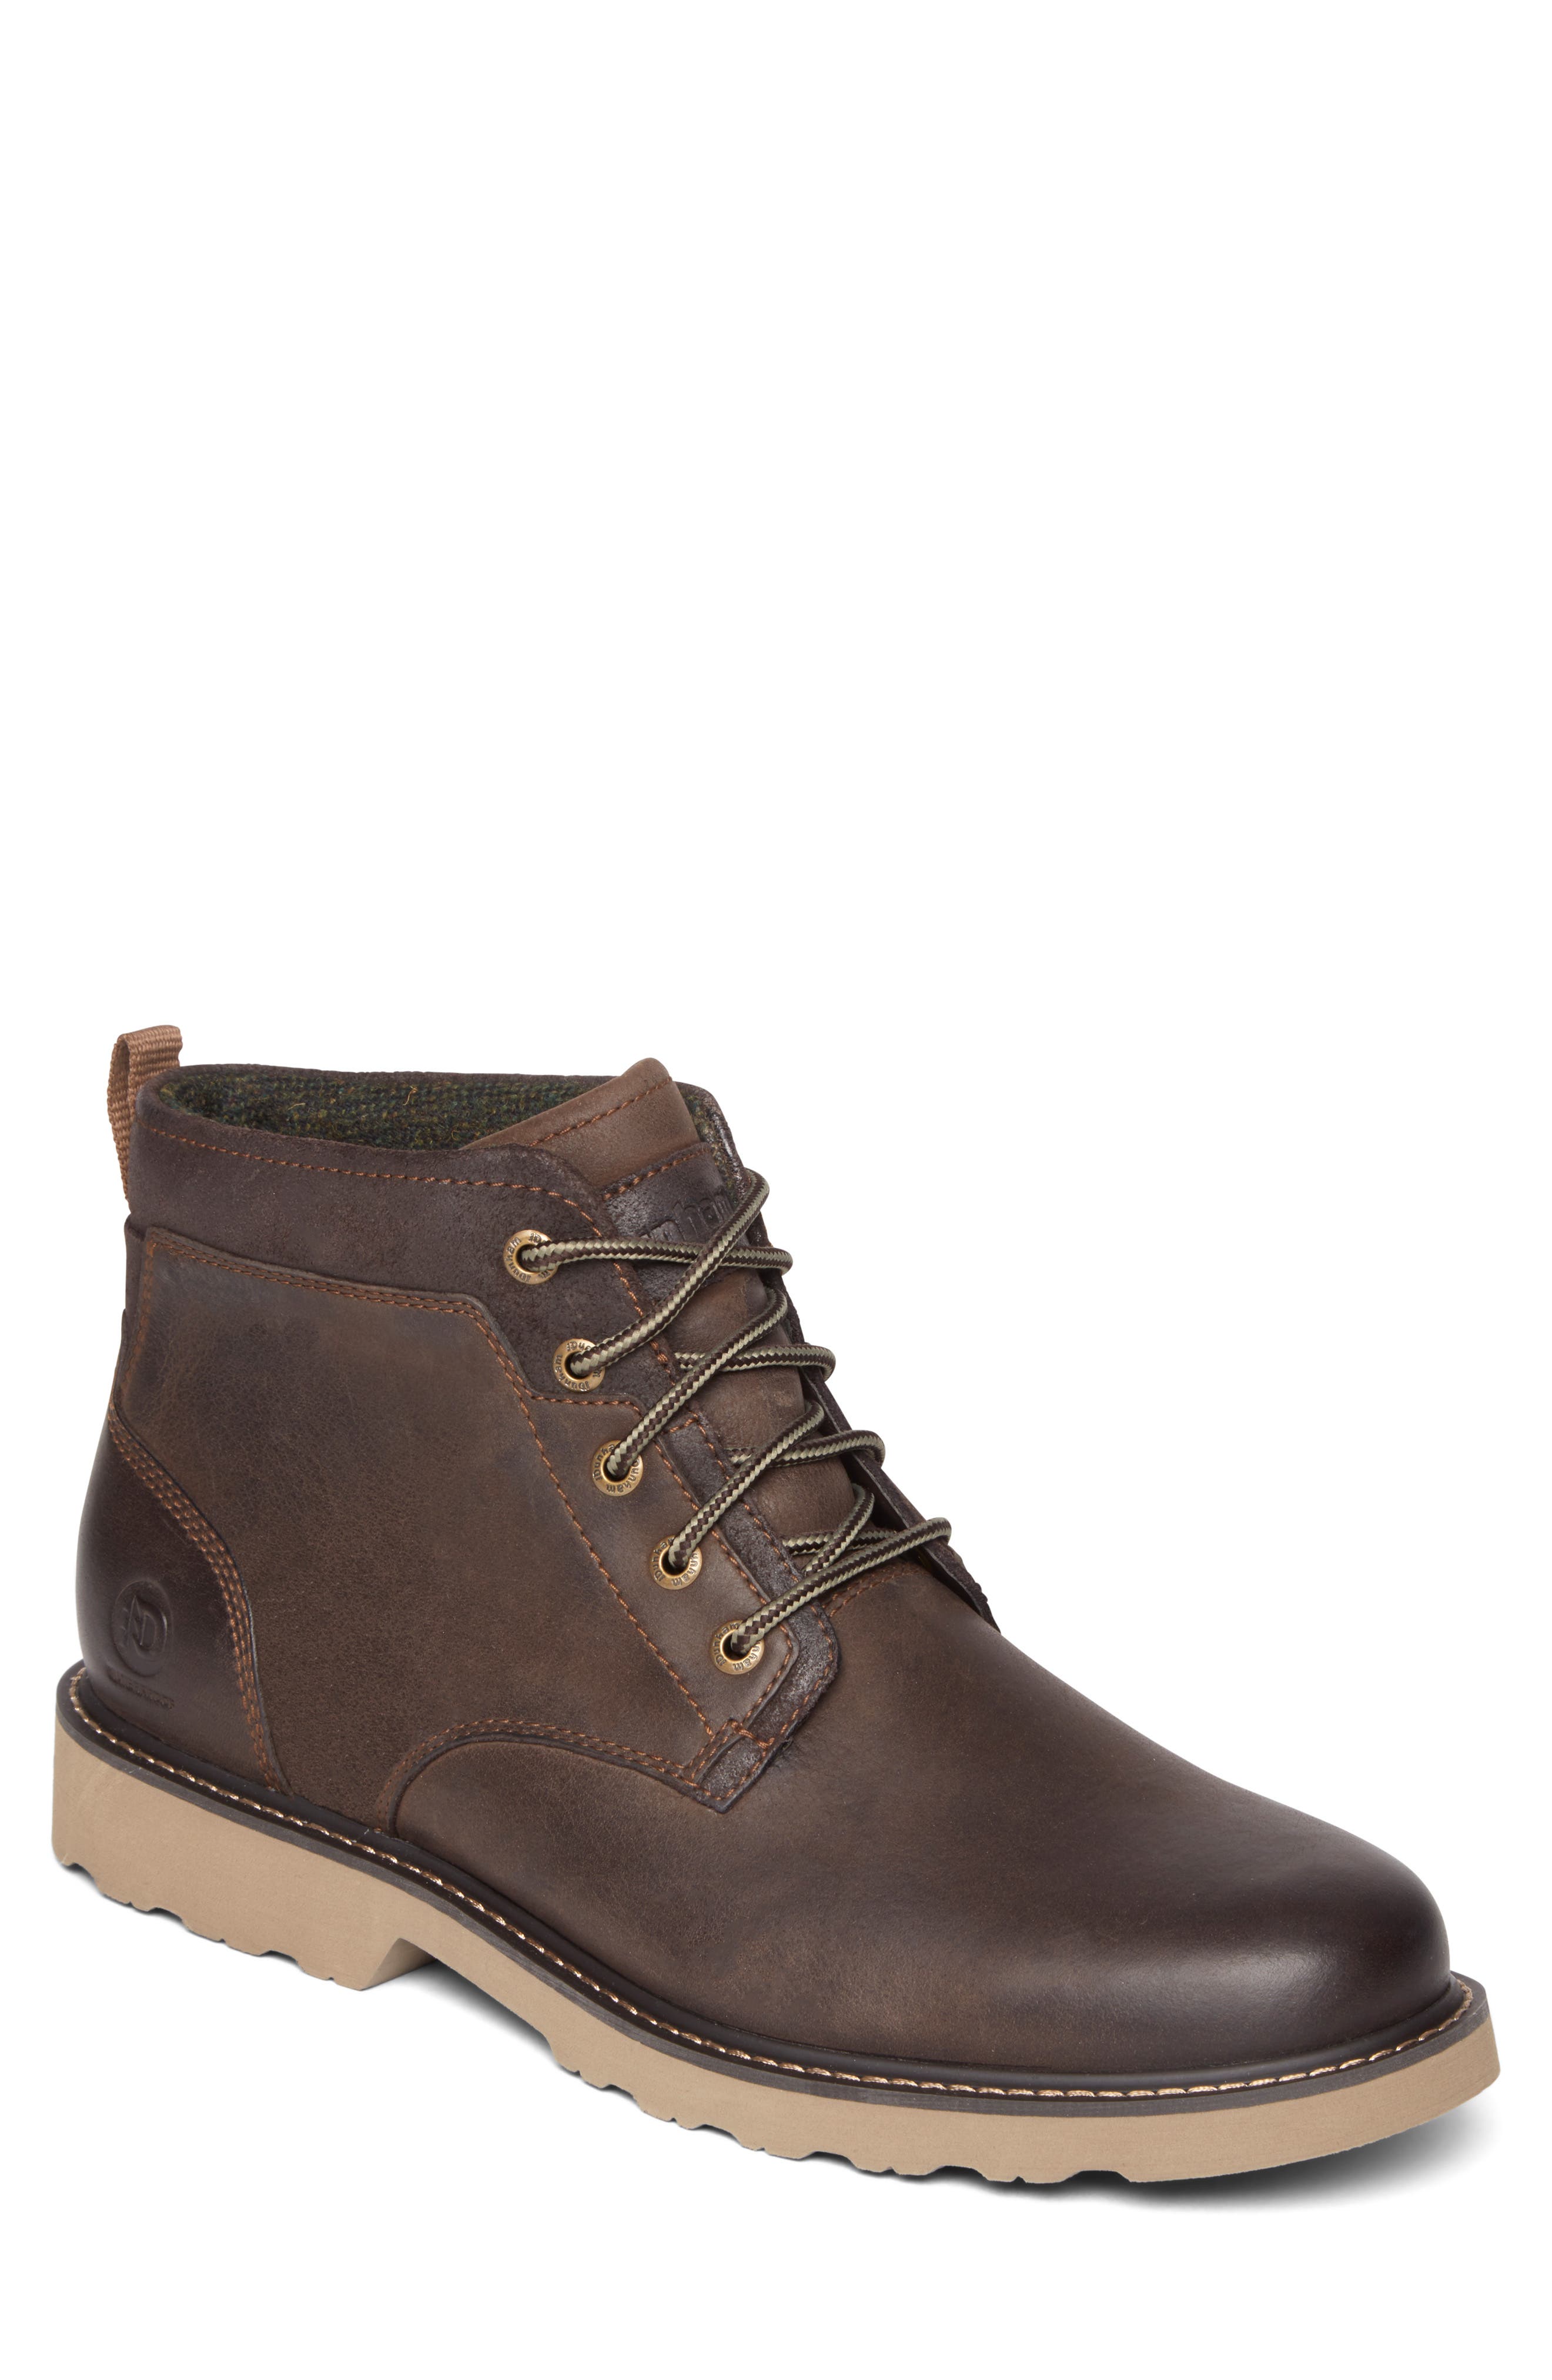 Mens Hiking Boots | Nordstrom